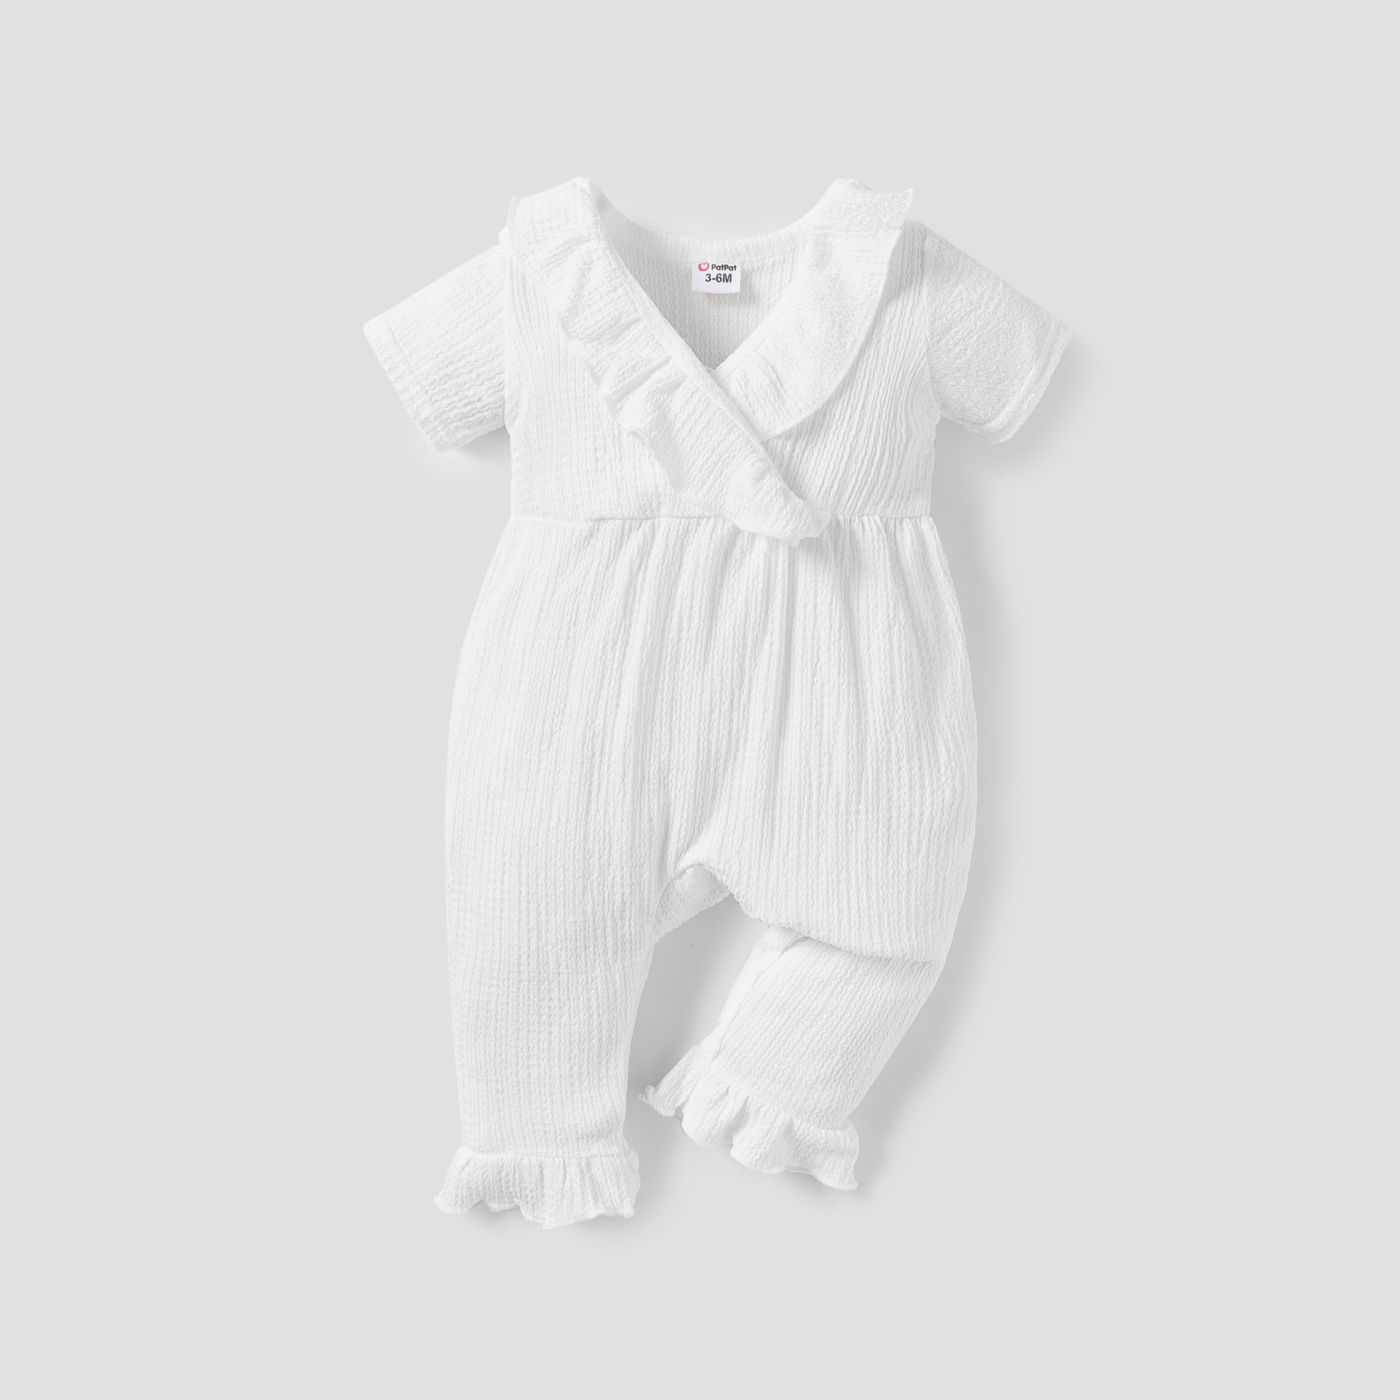 Baby Clothing | Old Navy